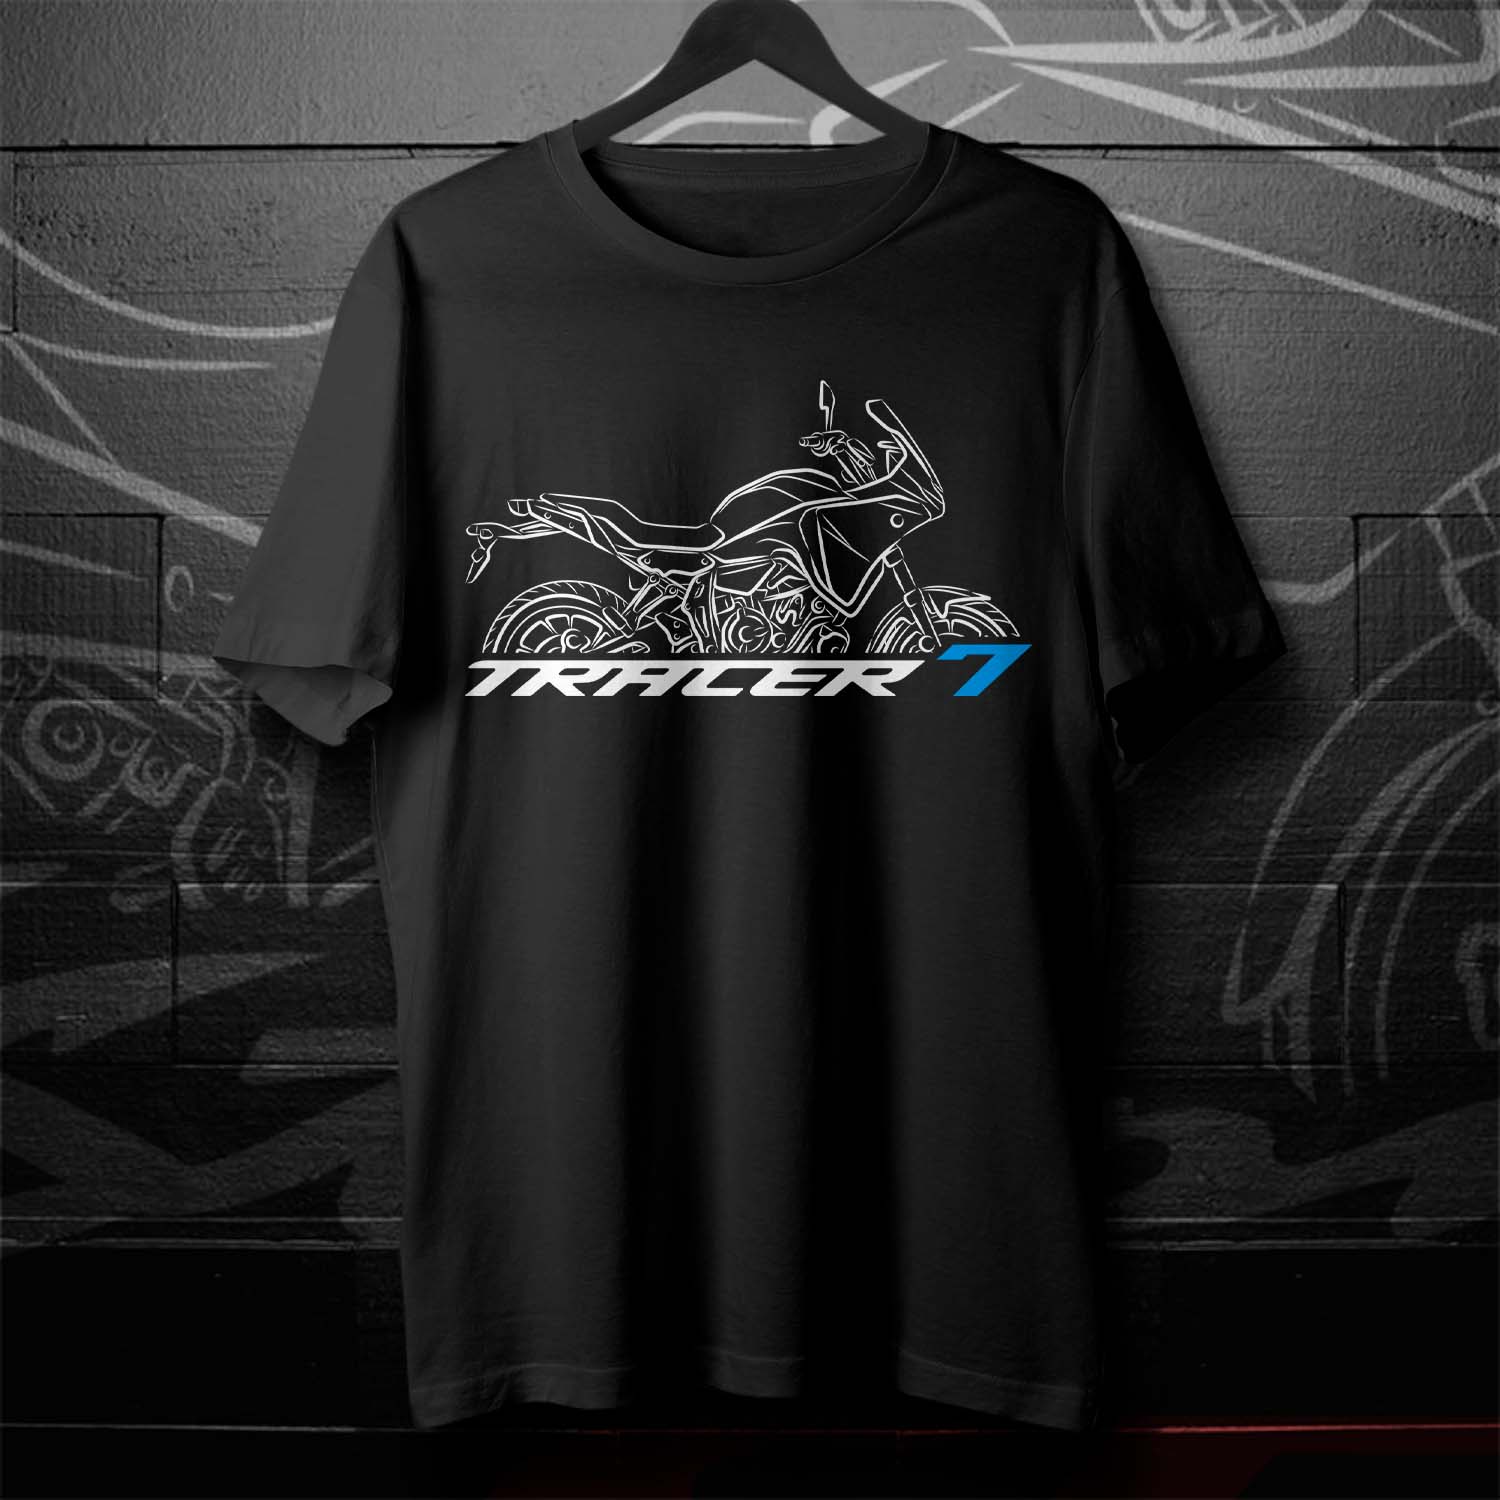 T-shirt Yamaha Tracer 7 for Motorcycle Riders